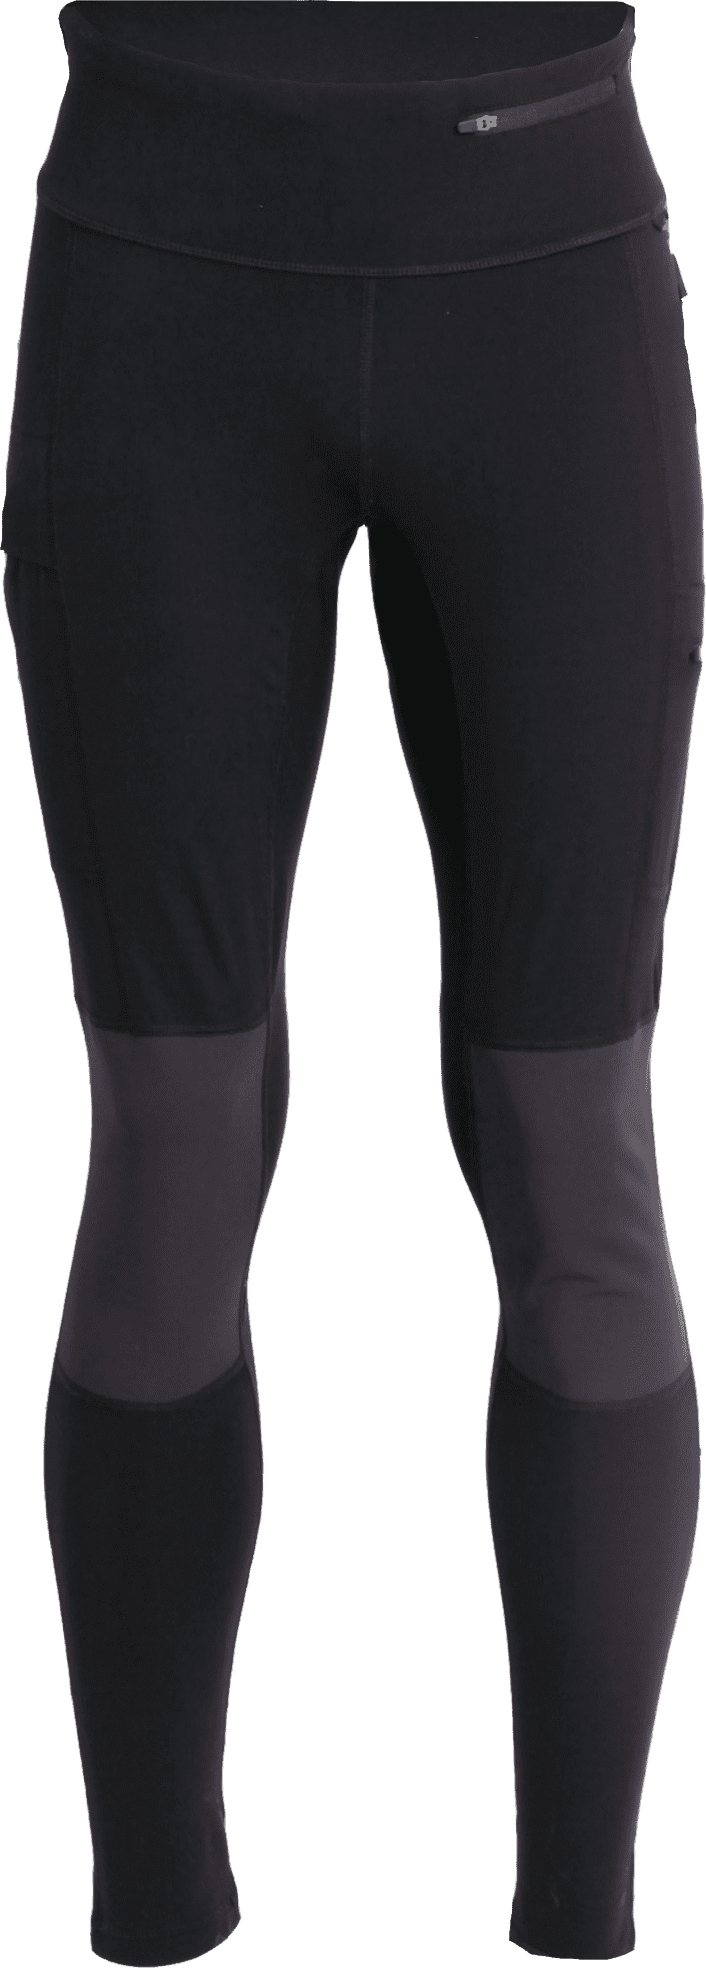 Buy Dobsom Women's Outdoor Tights from Outnorth